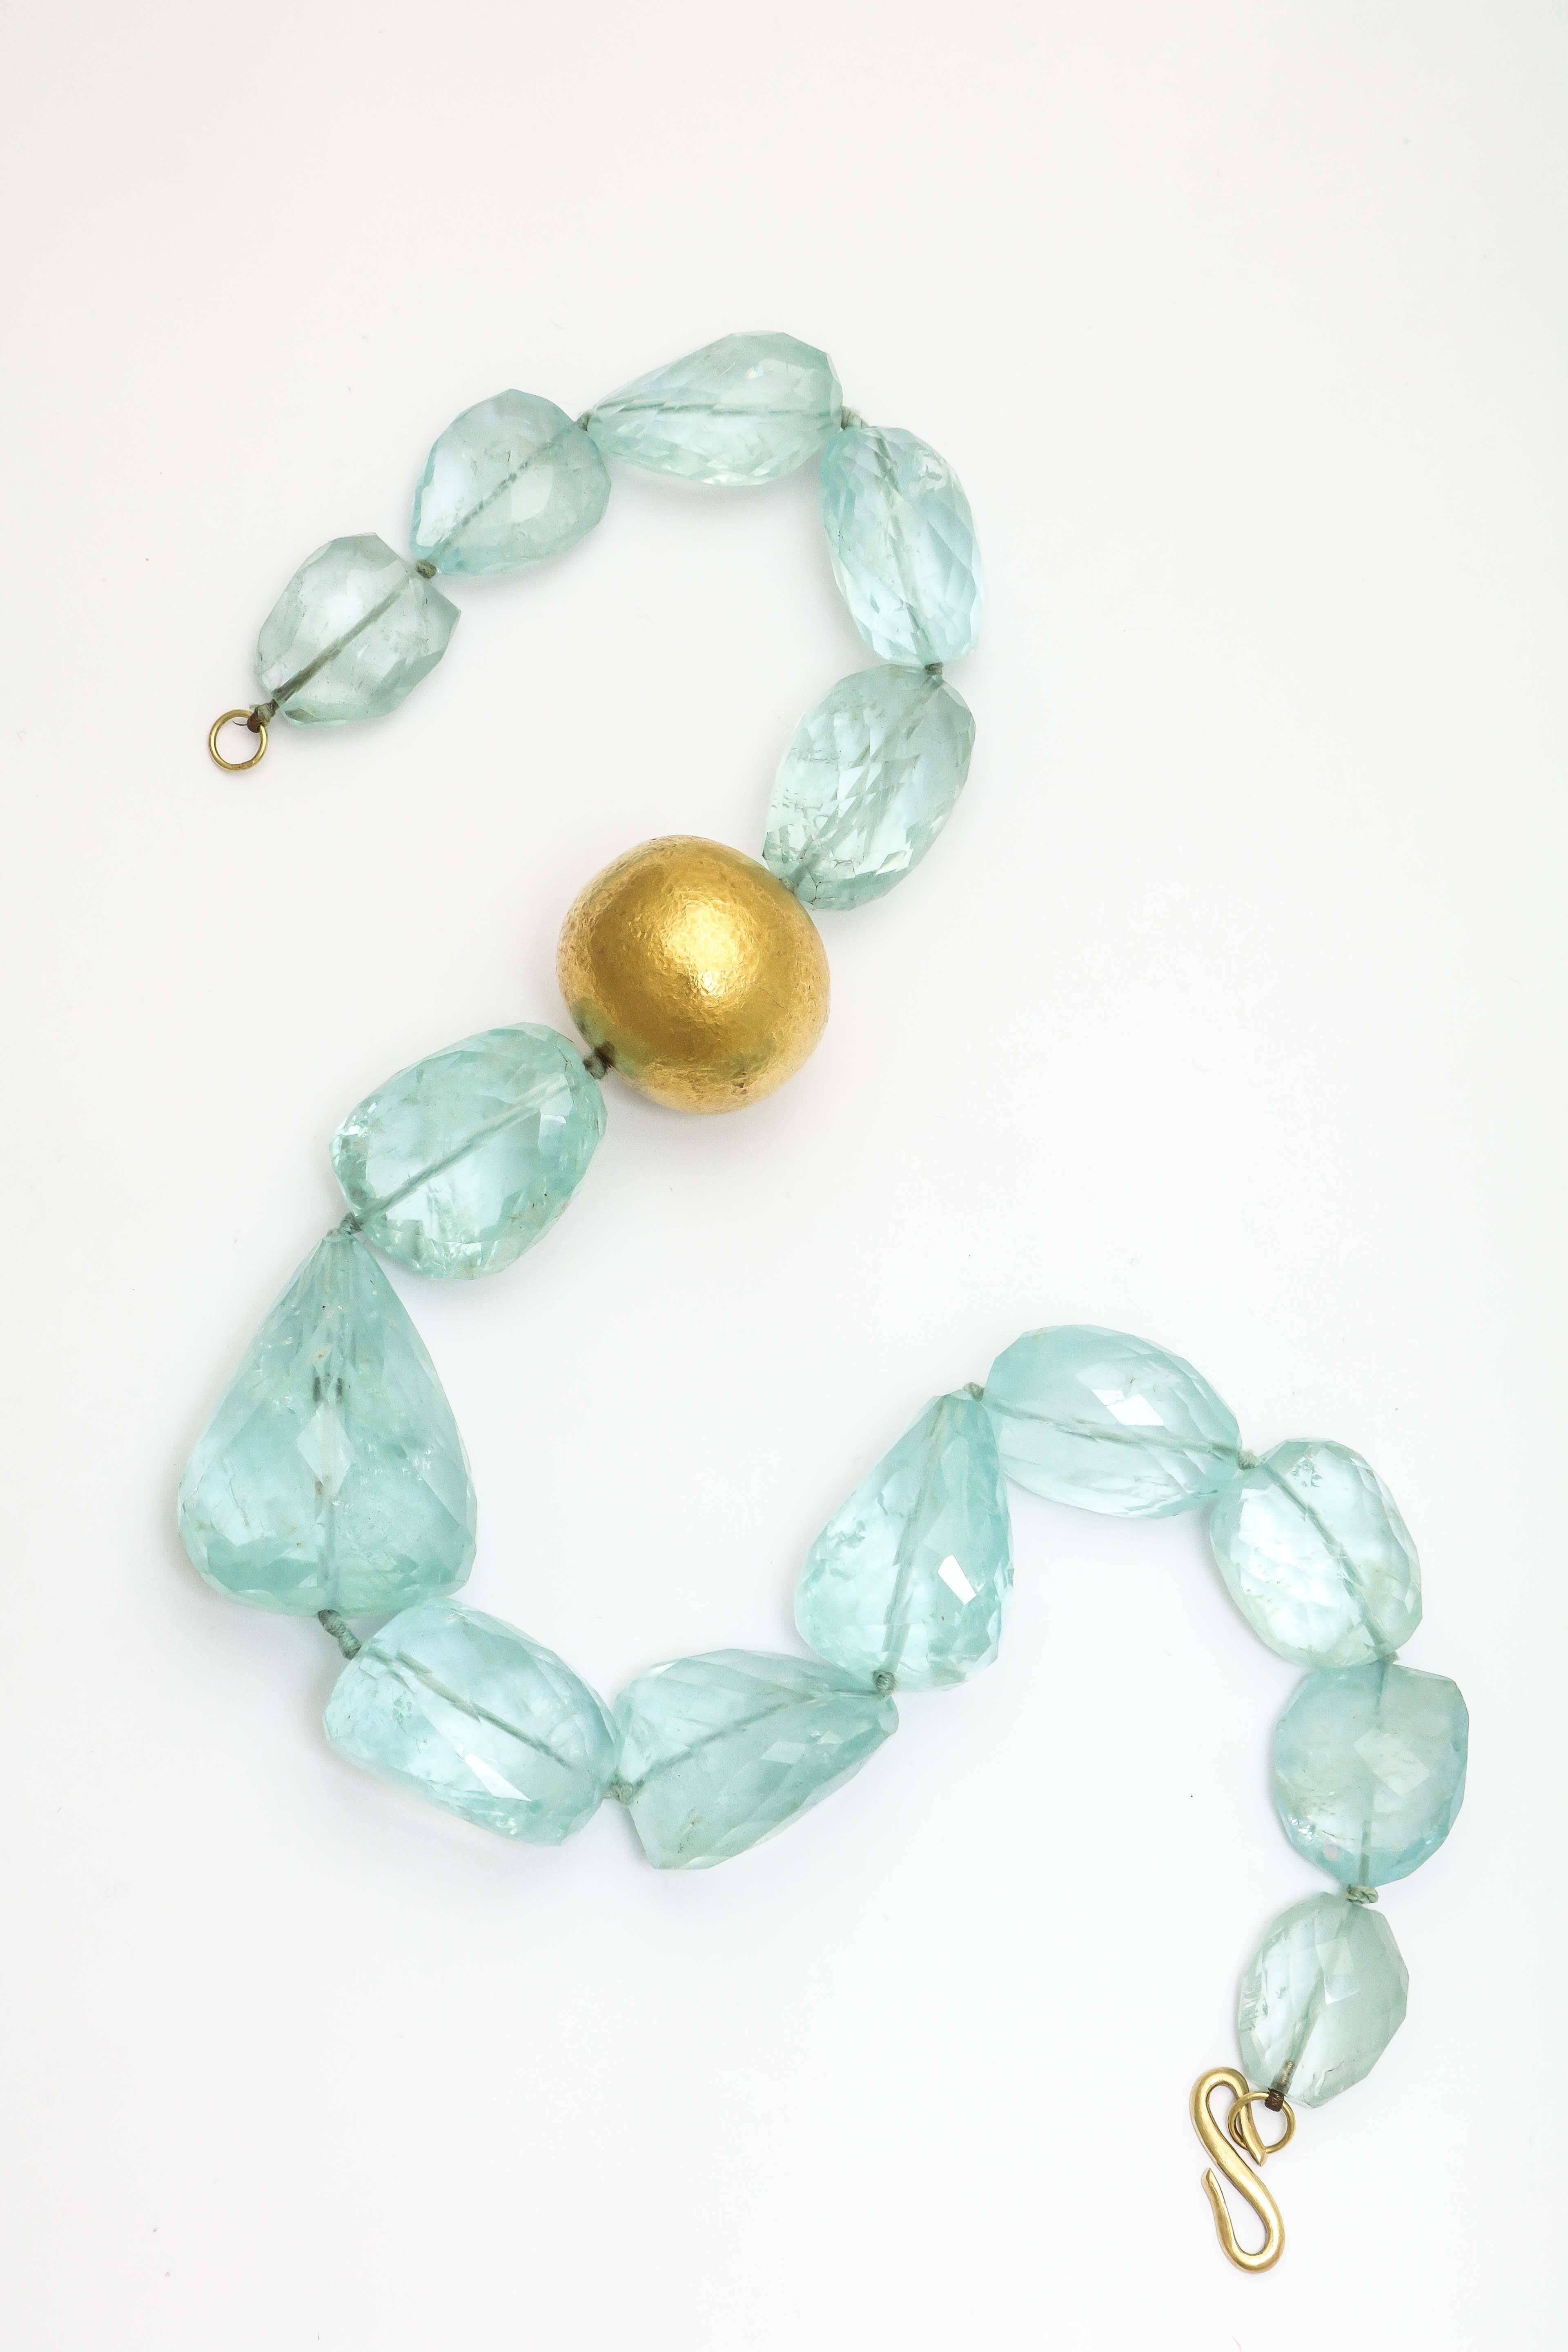 Super elegant Faceted Aquamarine & 18kt Yellow Gold hand hammered bead necklace.  The Aquamarines are graduated in six are total over 650carats. in weight.  The clasp is hand made and is marked 750 for 18kt.  SO elegant =- yet over the top.
  The